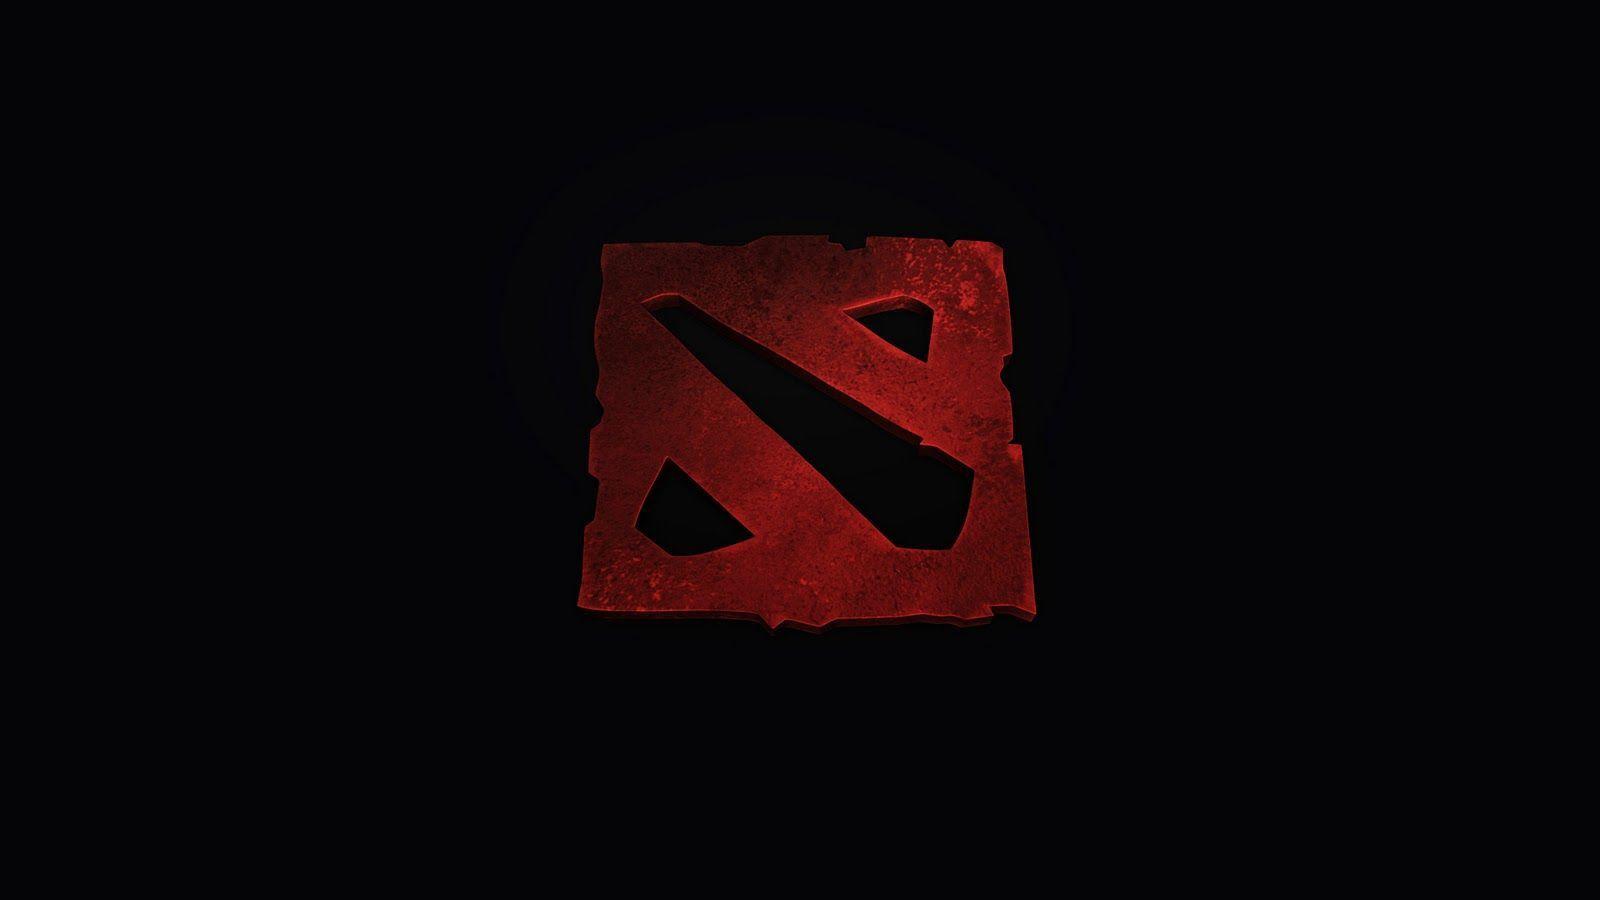 Dota2 Logo - Dota 2 Logos HD Wallpapers in PC Games Free Download Is A Awesome ...